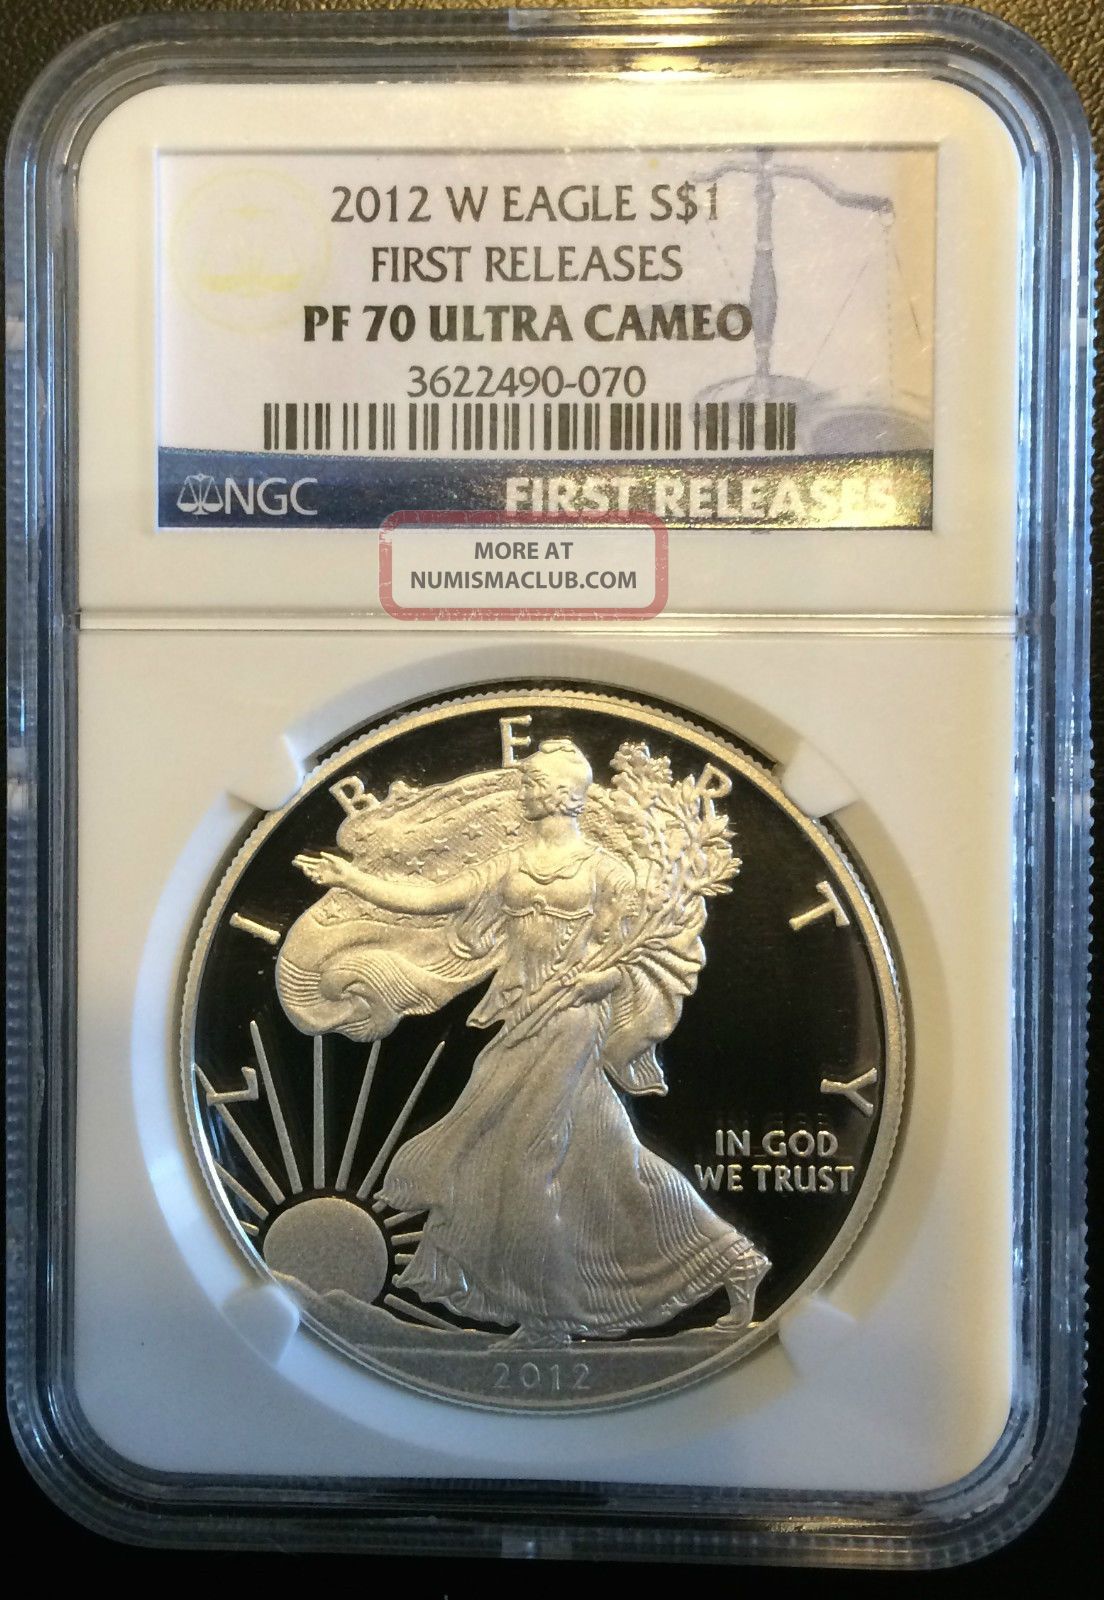 2012 W Silver Eagle $1 First Release Ngc Pf70 Ultra Cameo Proof 1 Oz